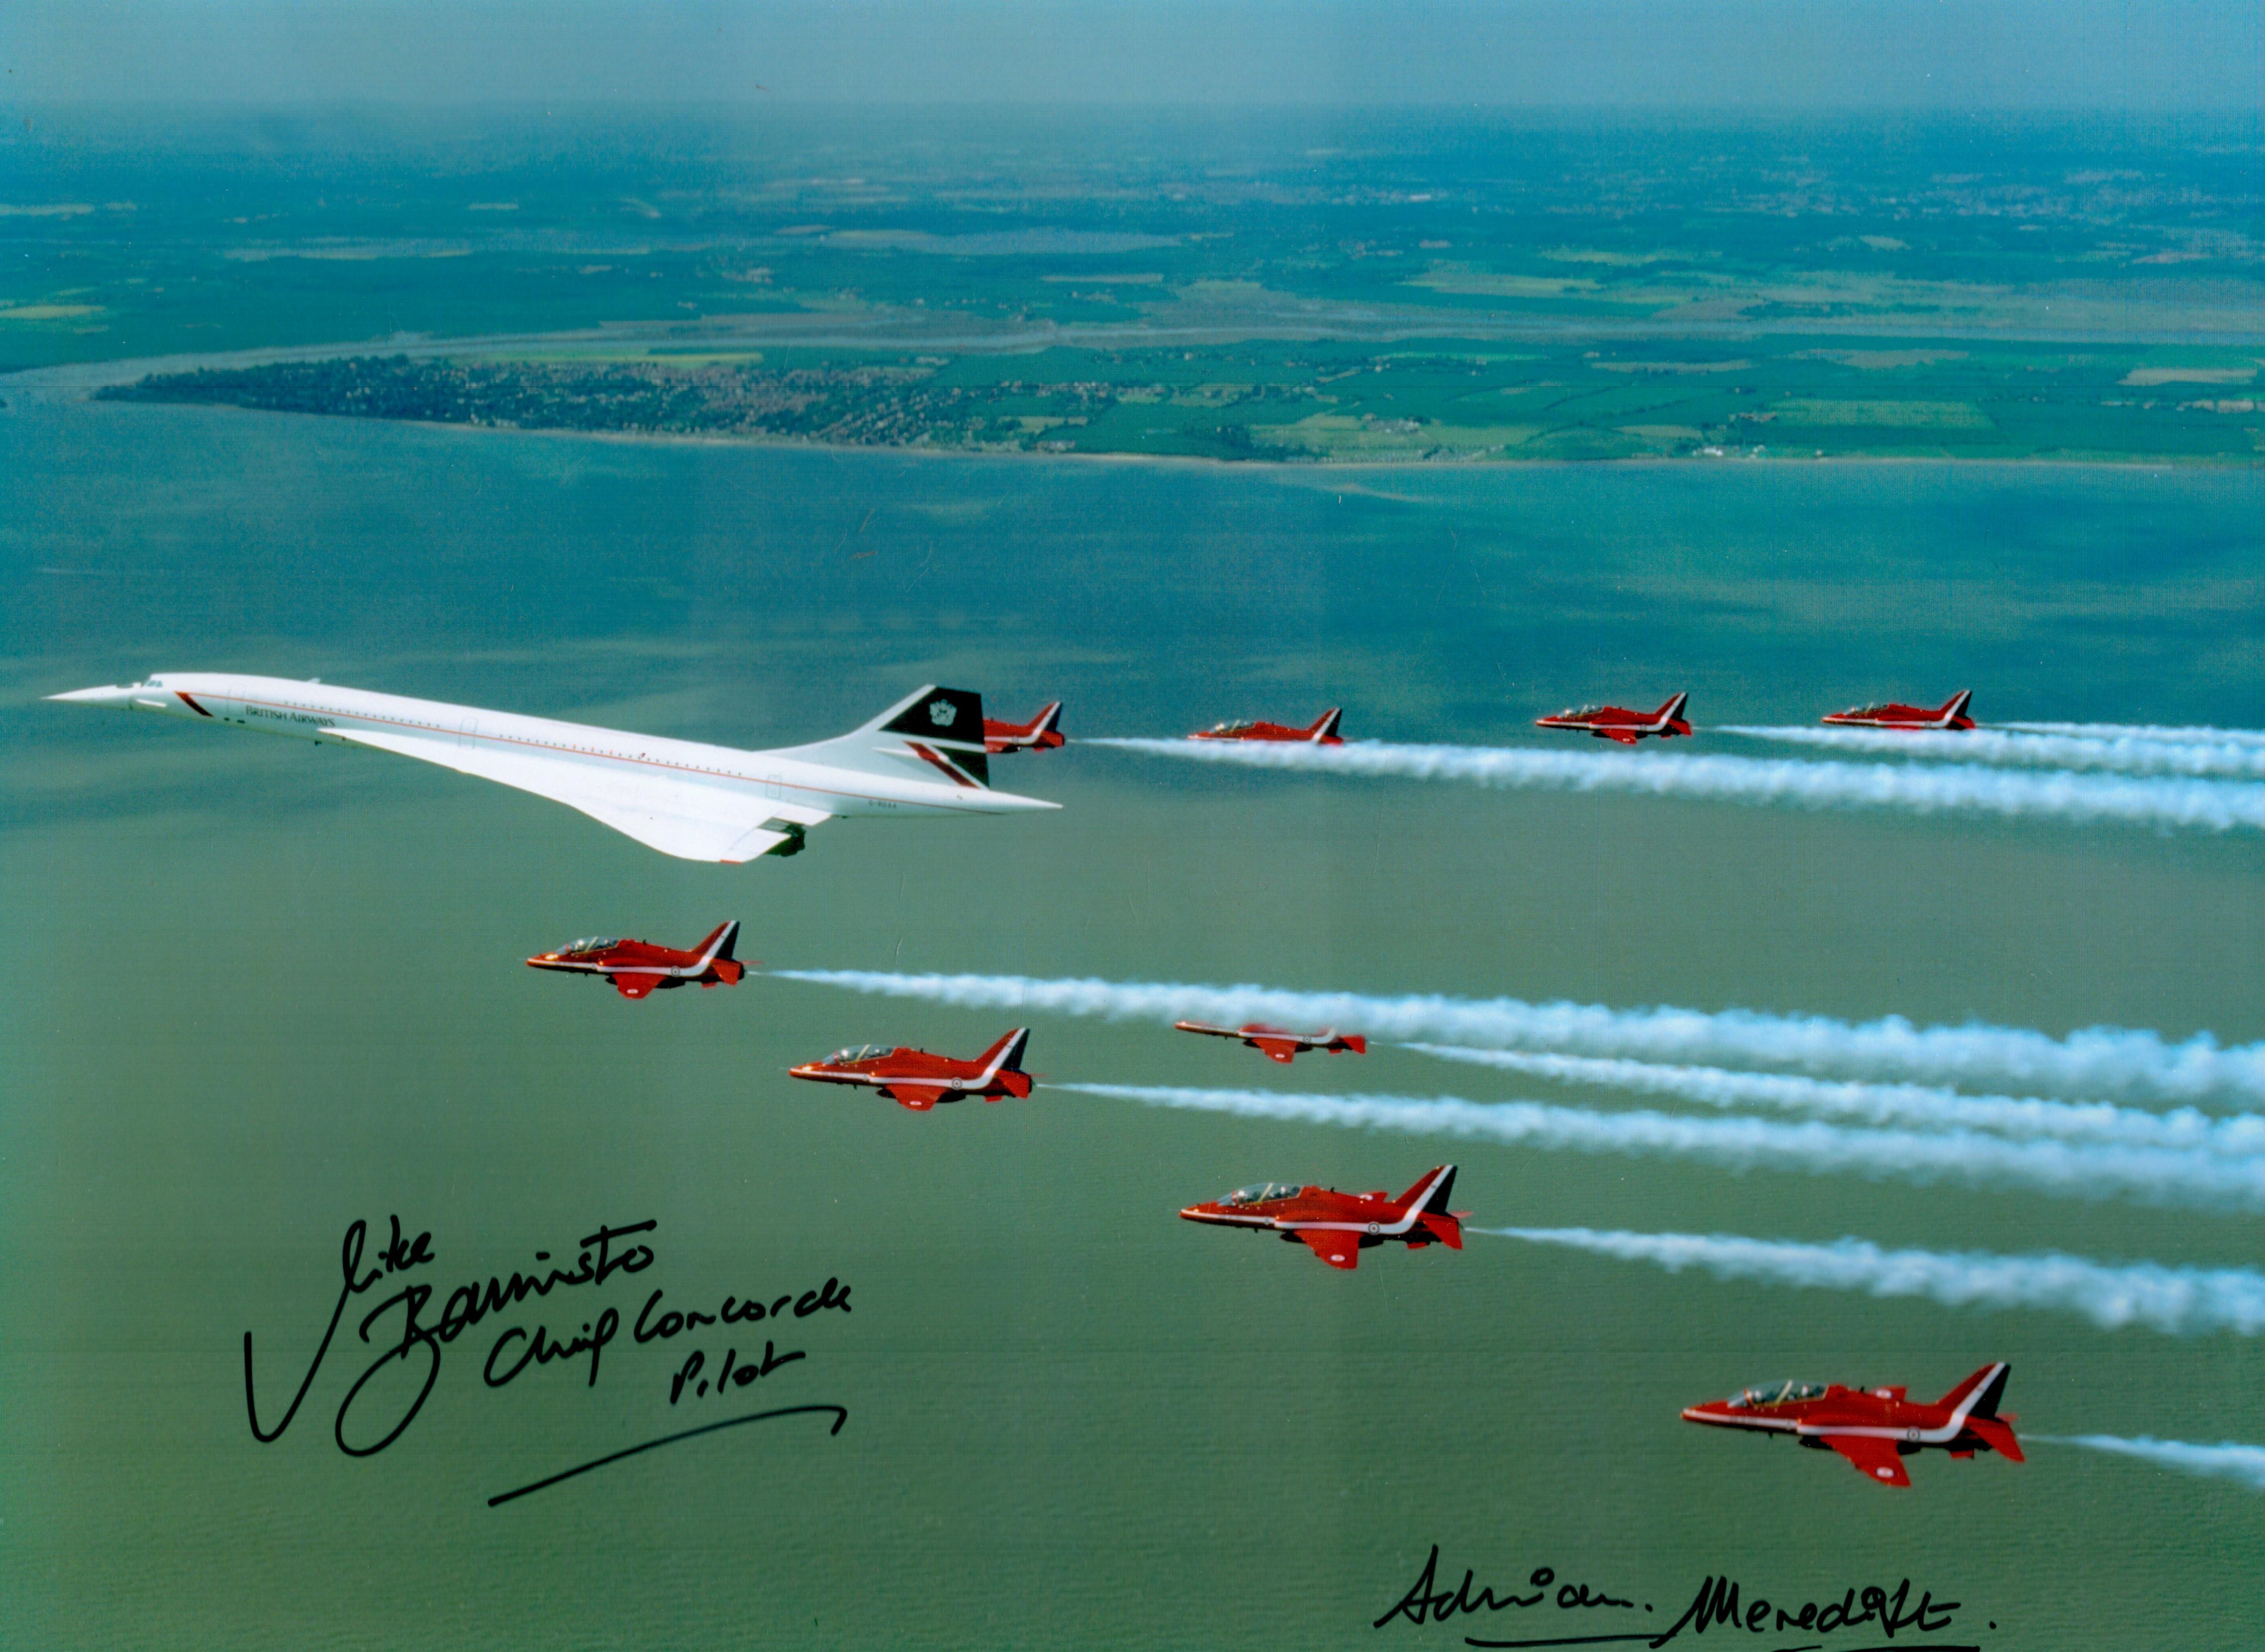 Concorde and Red Arrows Chief Pilot Capt Mike Banister and photographer Adrian Meredith signed